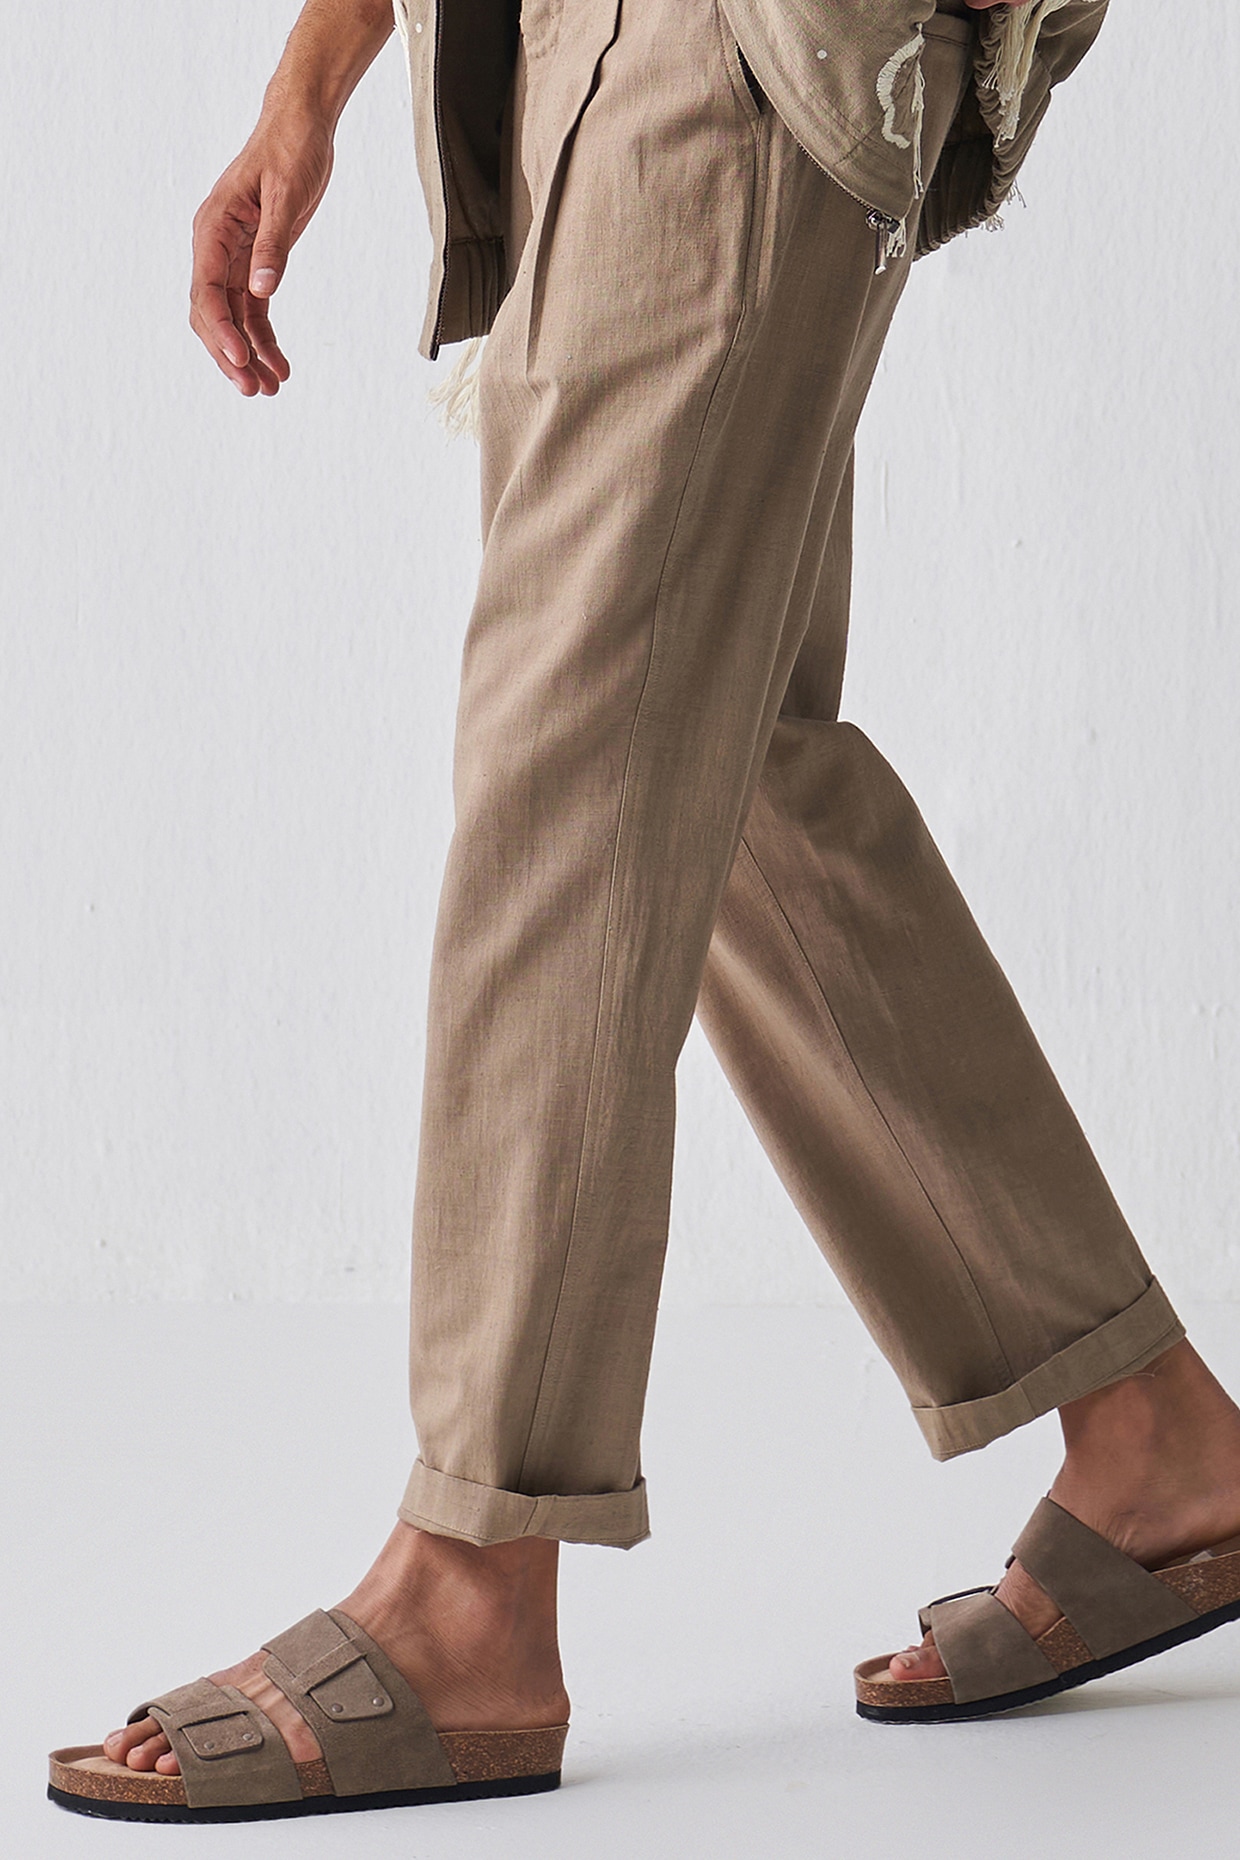 Amiri Cotton-poplin Single-pleated Pants with Relax fit men - Glamood Outlet